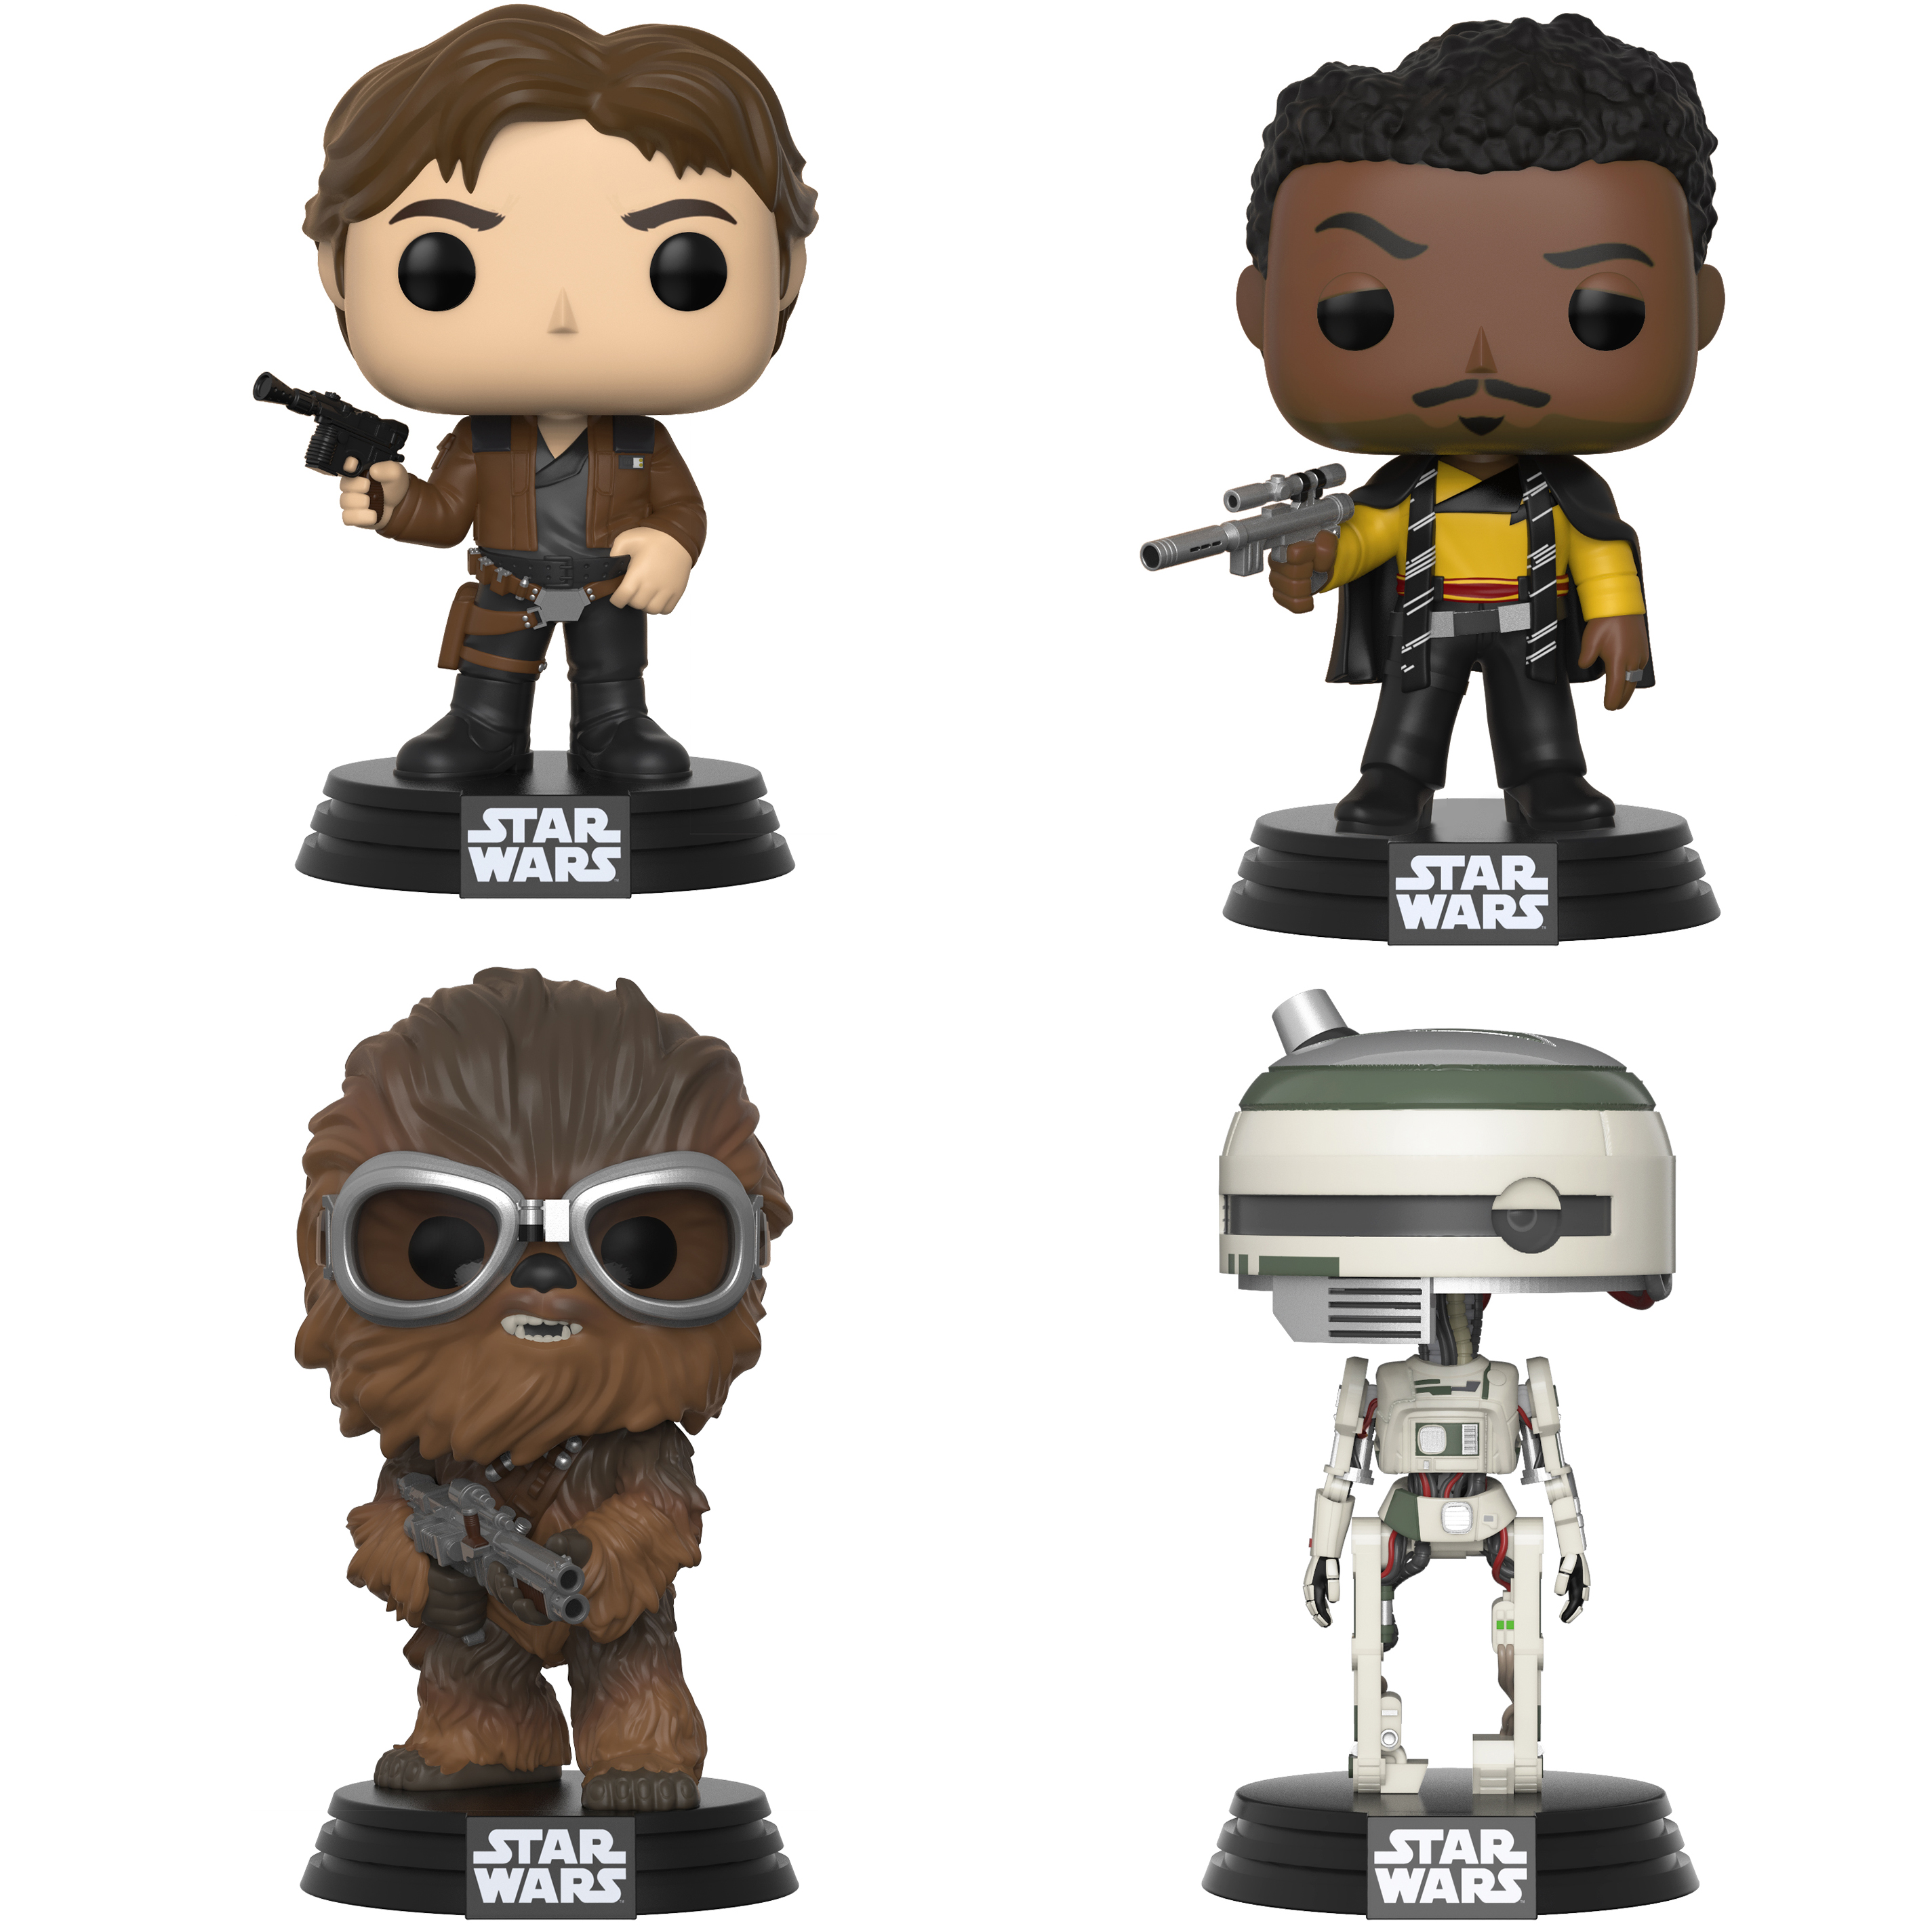 Funko POP! Star Wars Solo, A Star Wars Story Collectors Set - Han Solo, Chewie w/ Goggles, Lando Main Outfit & L3-37 - image 1 of 5